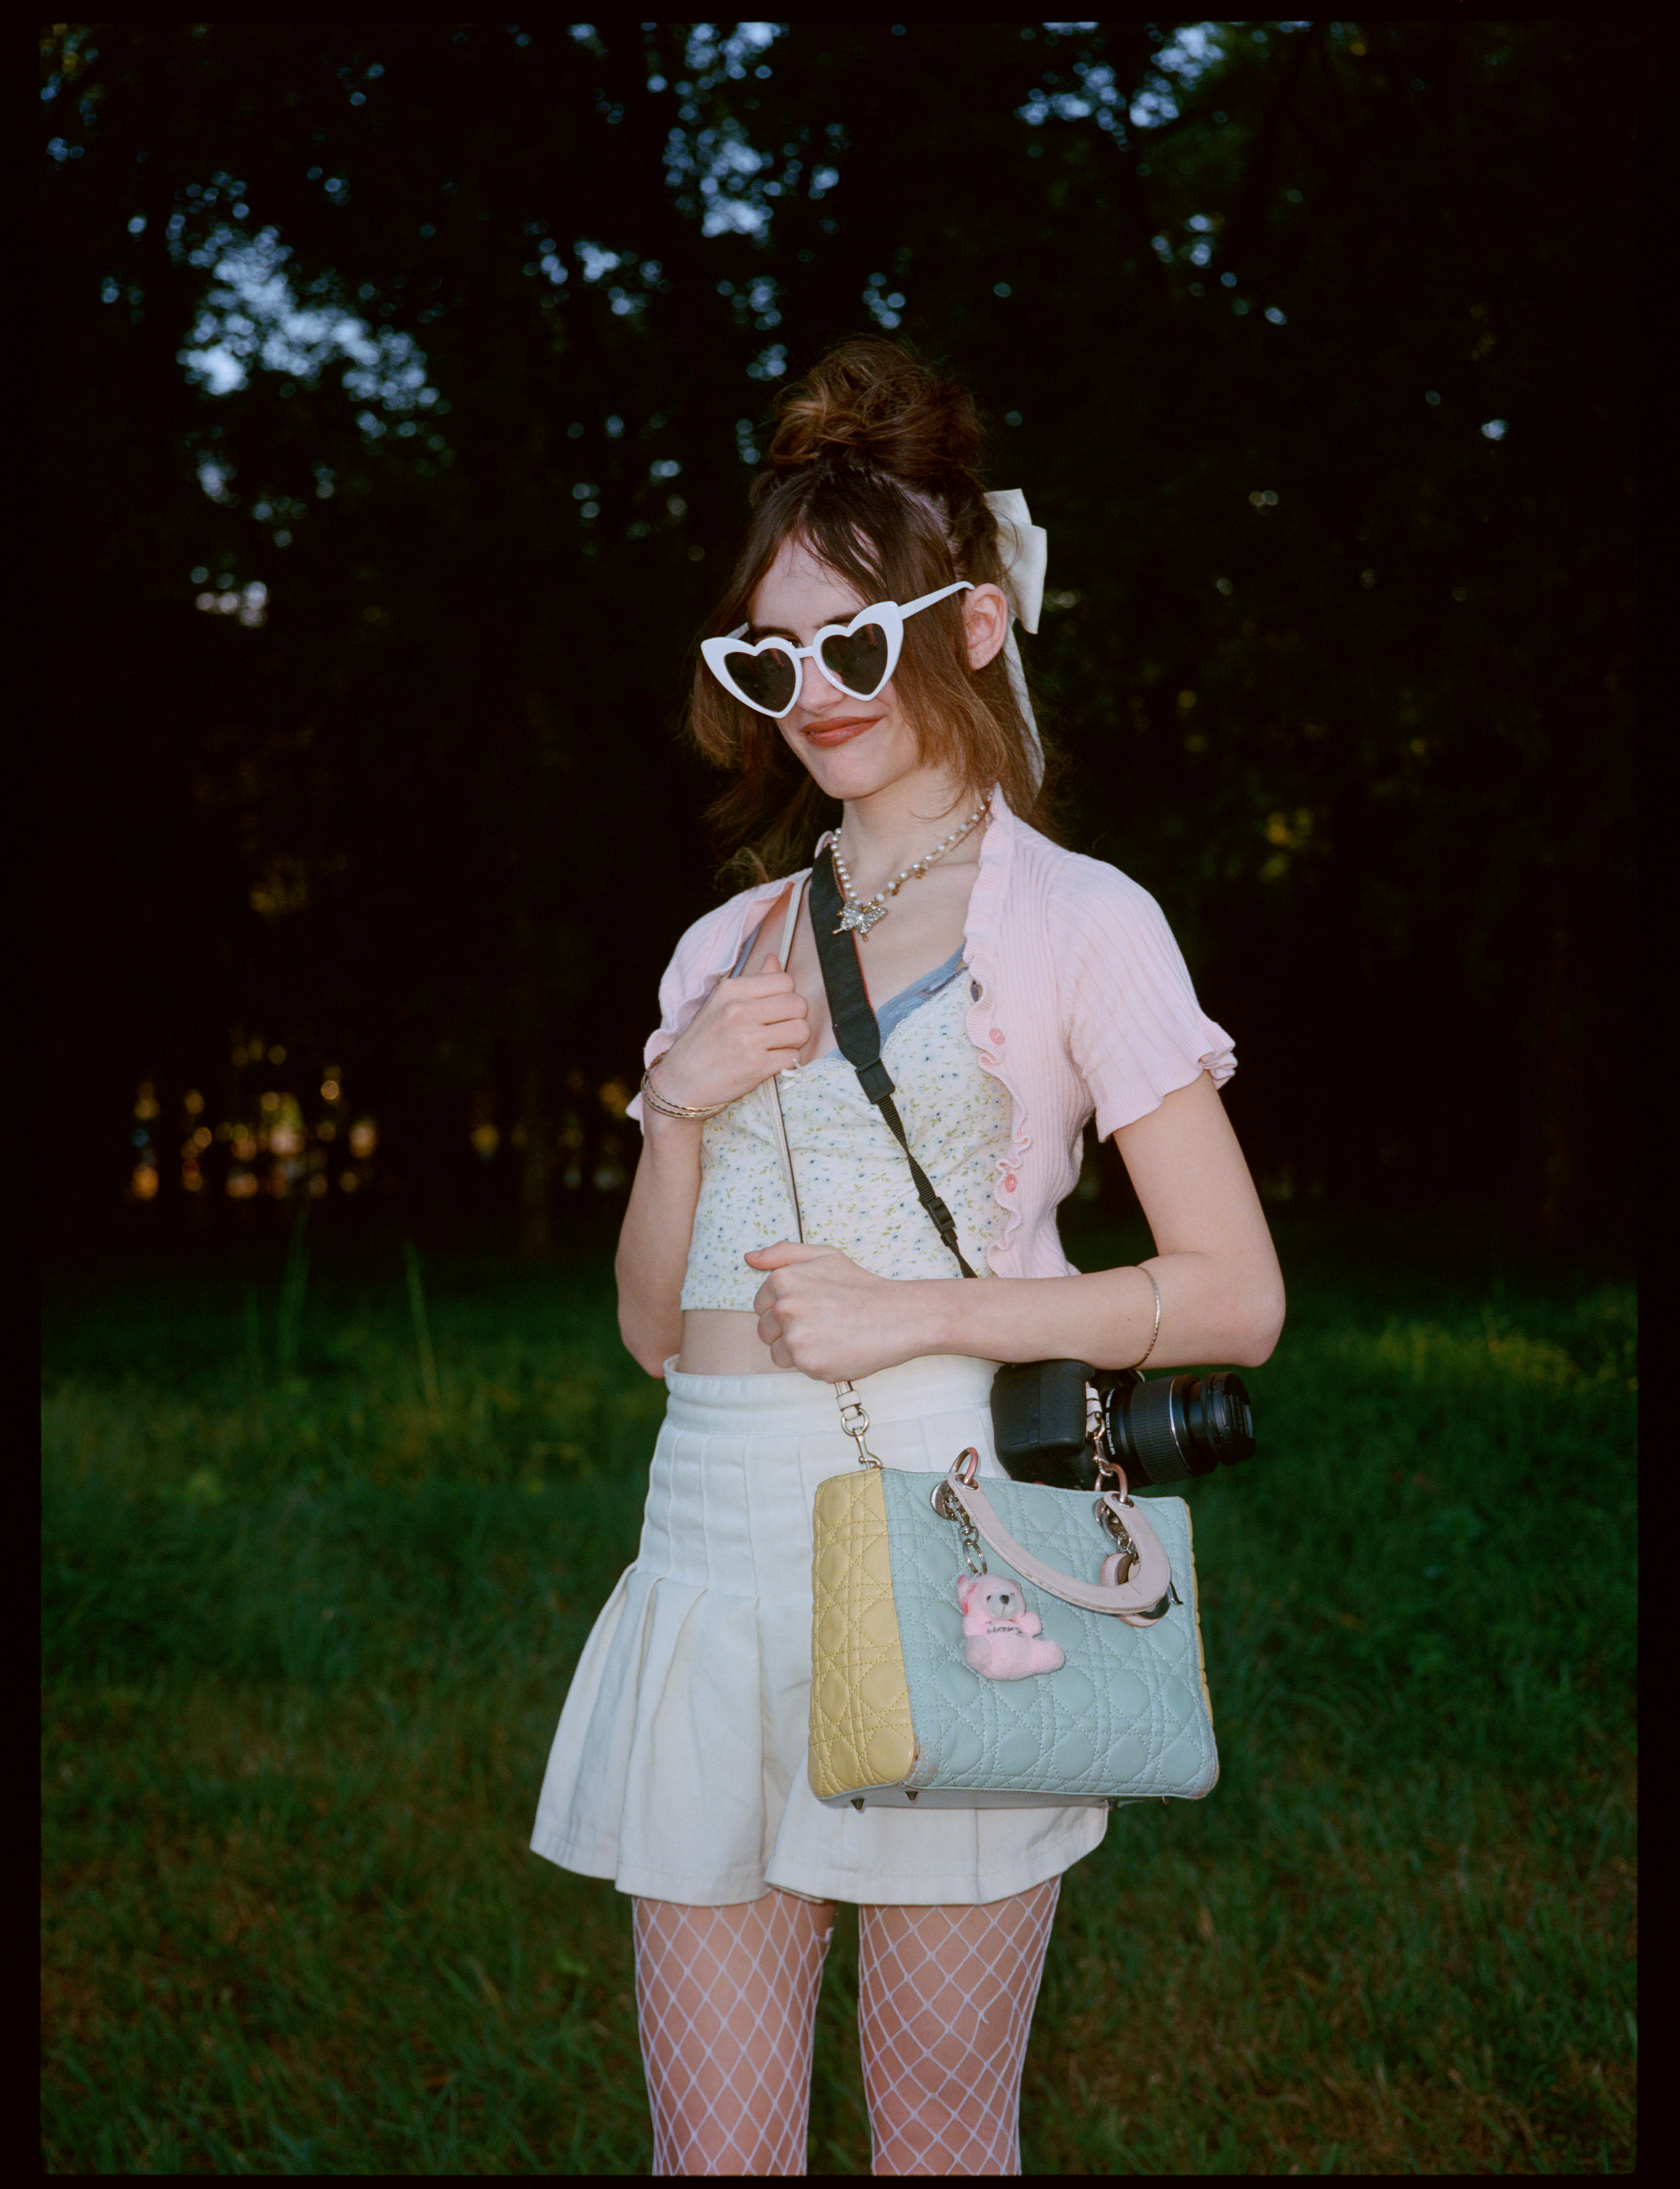 a lana del rey fan wears a cropped blazer and cardigan and a white peplum skirt. she carries a pastel-coloured handbag and wears glasses shaped like love hearts